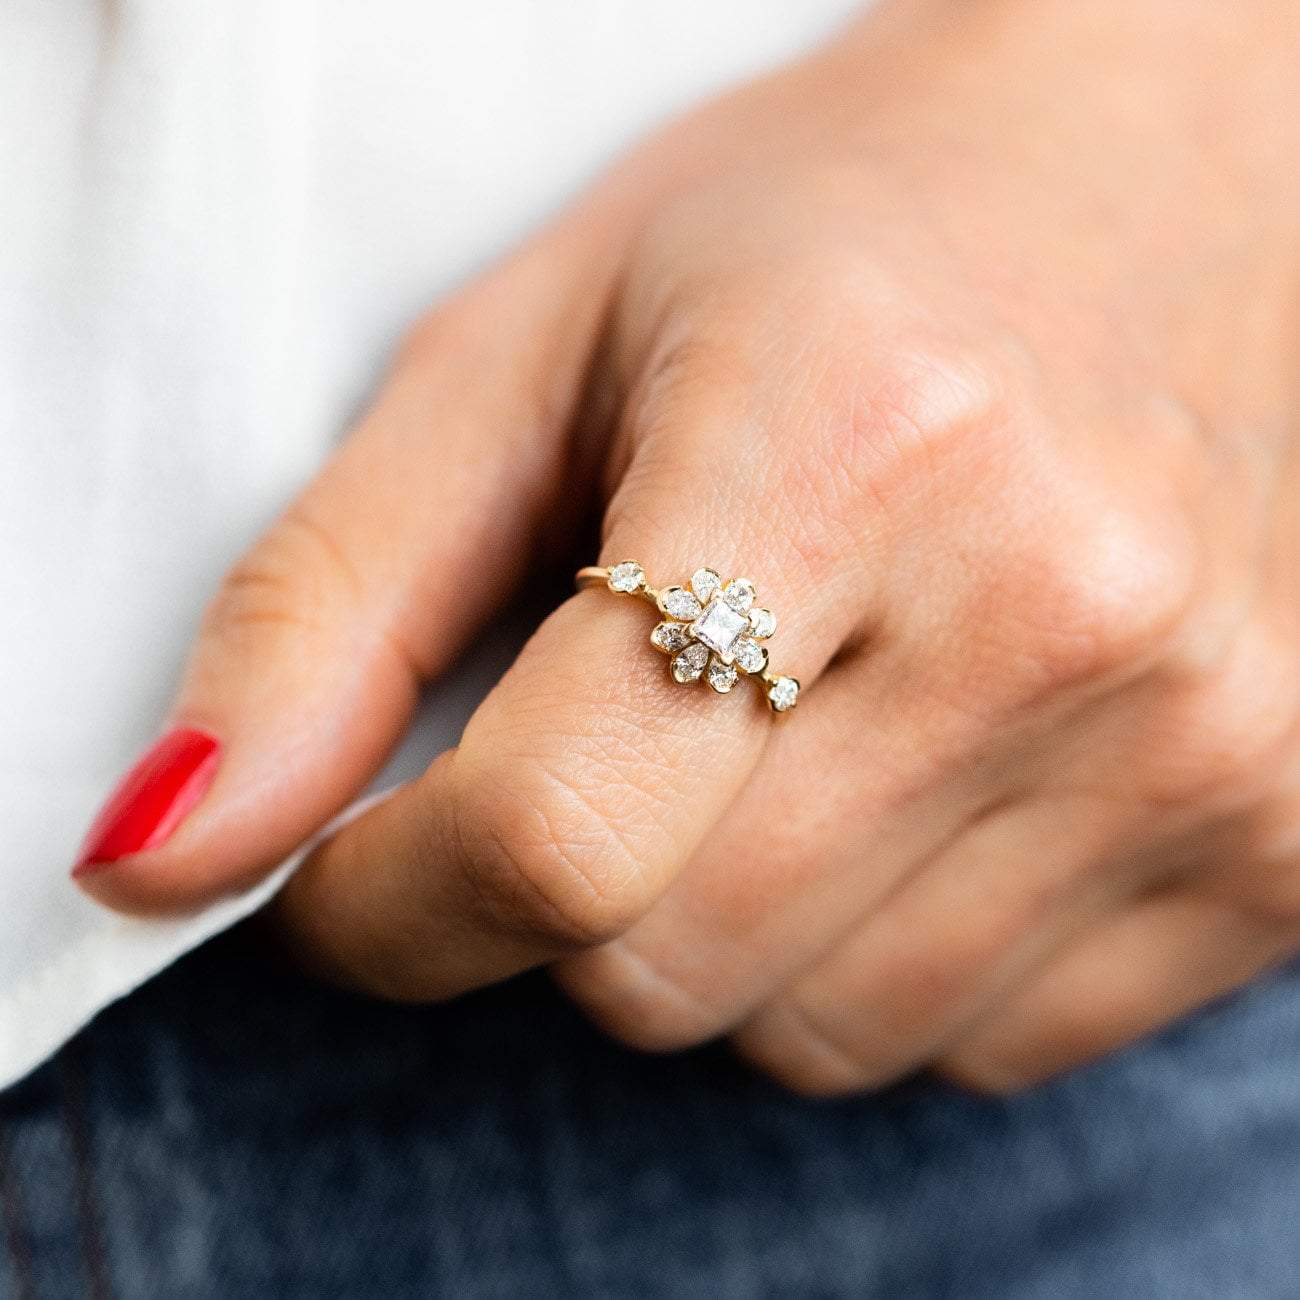 Local Eclectic Gold Diamond Flower Engagement Ring on Finger